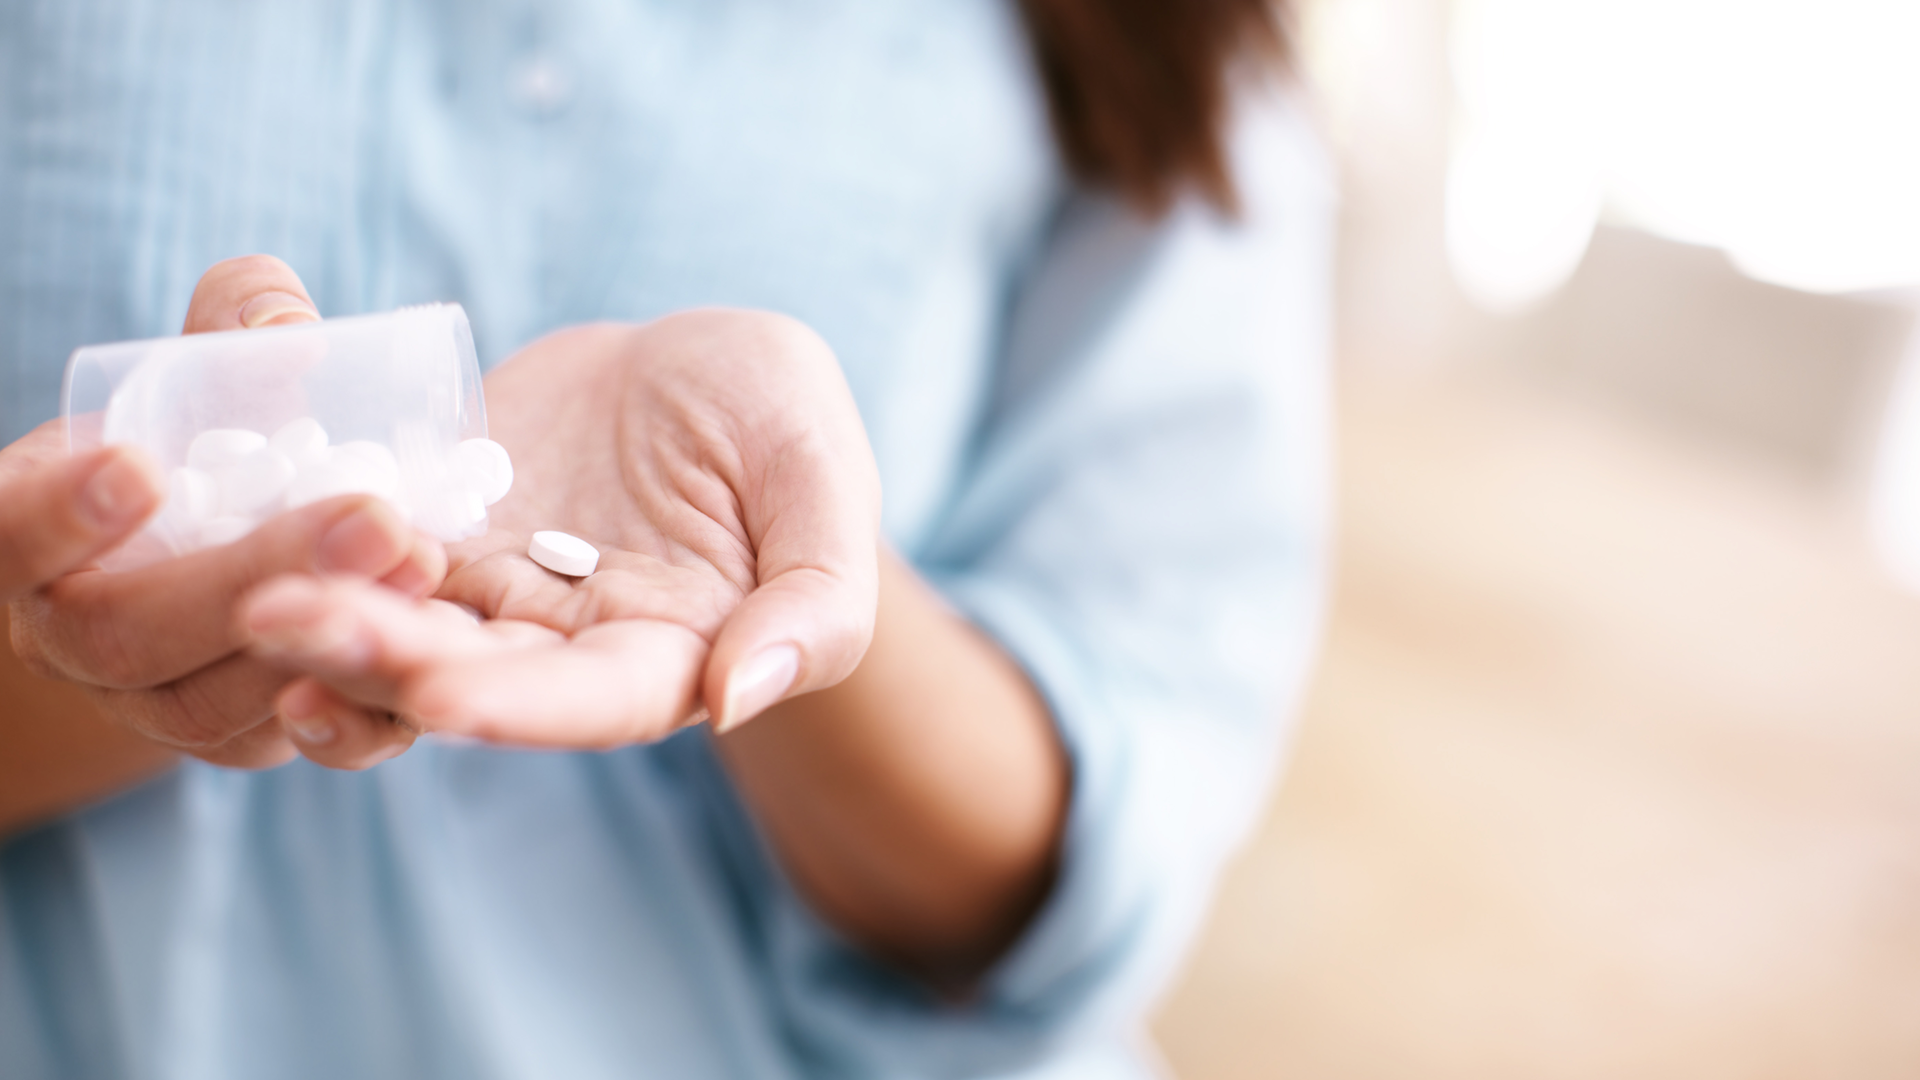 A woman in a blue shirt holds white pills in her palm